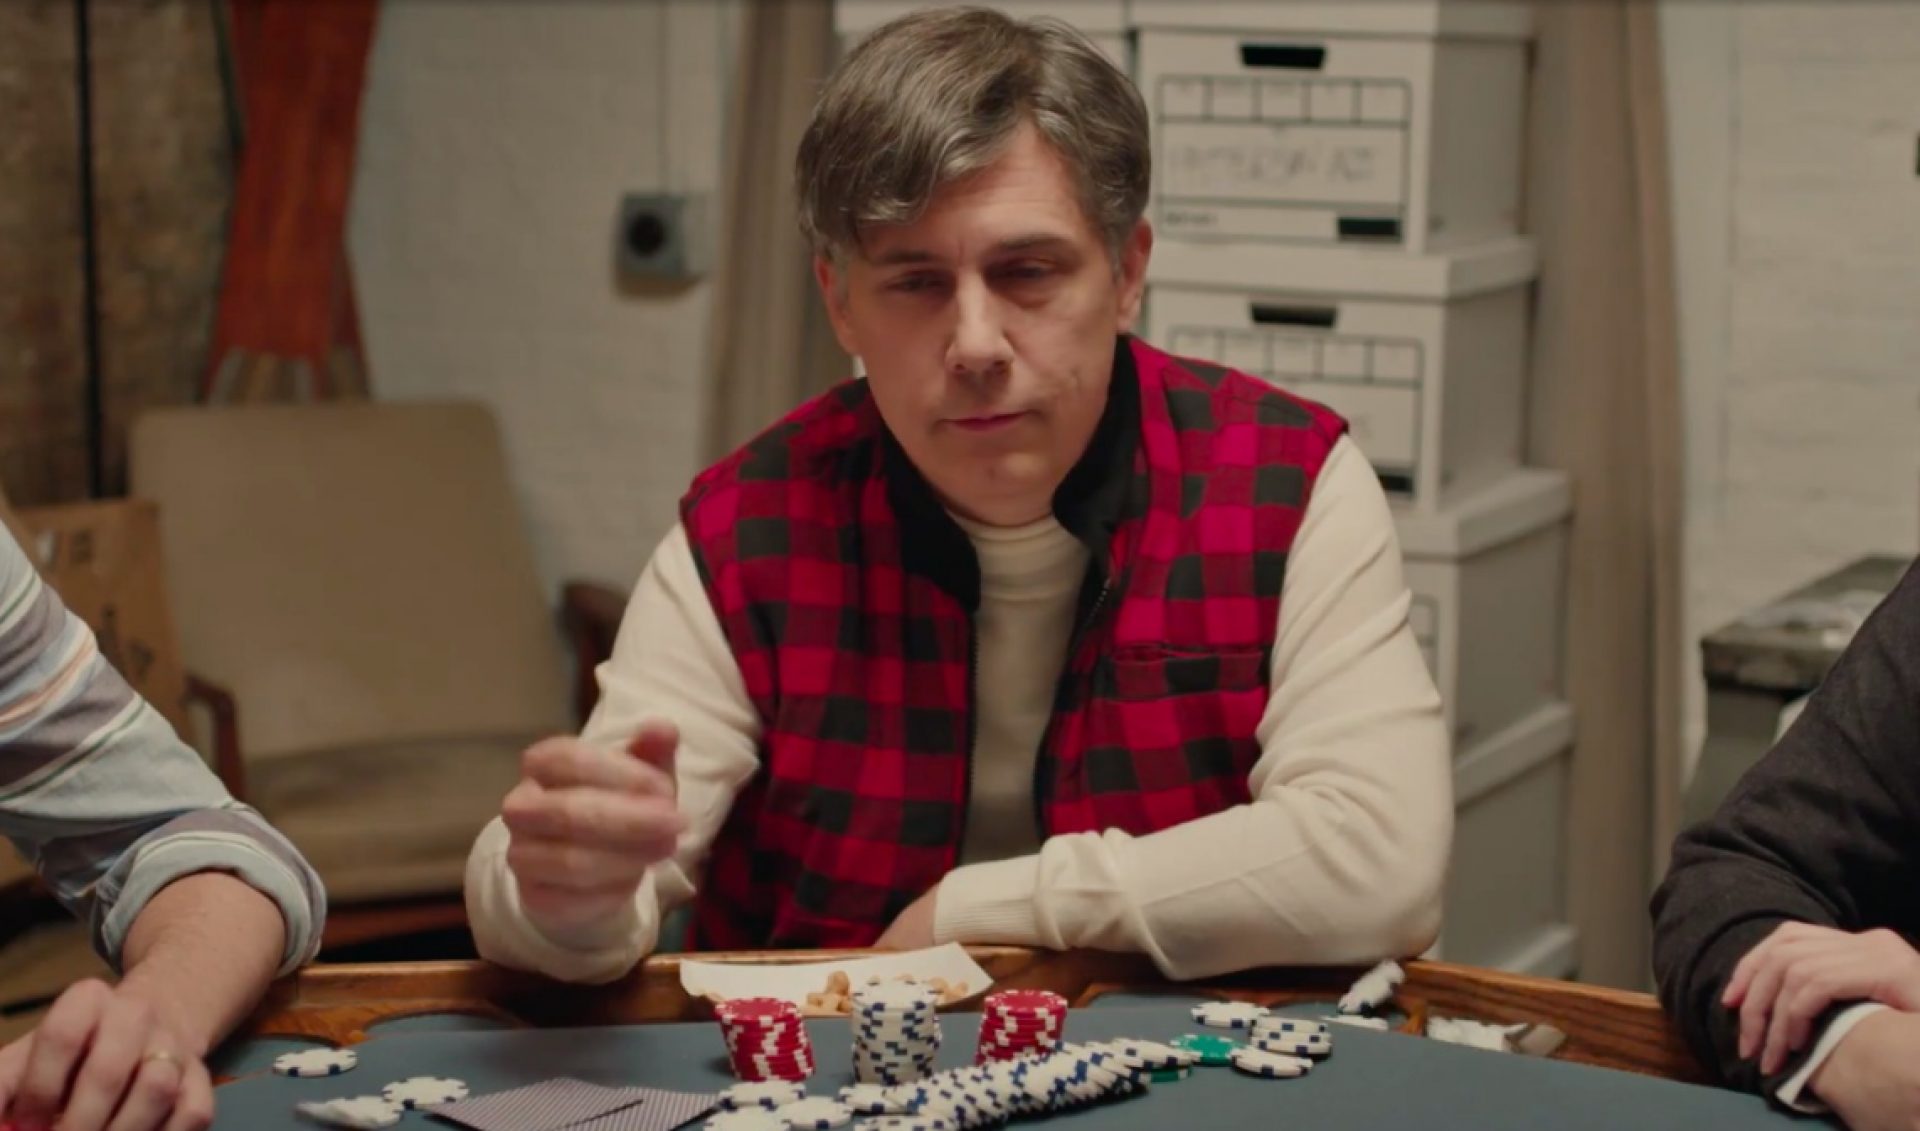 A Poker Hub Is Making Original SVOD Content, And Chris Parnell Is Taking A Starring Role